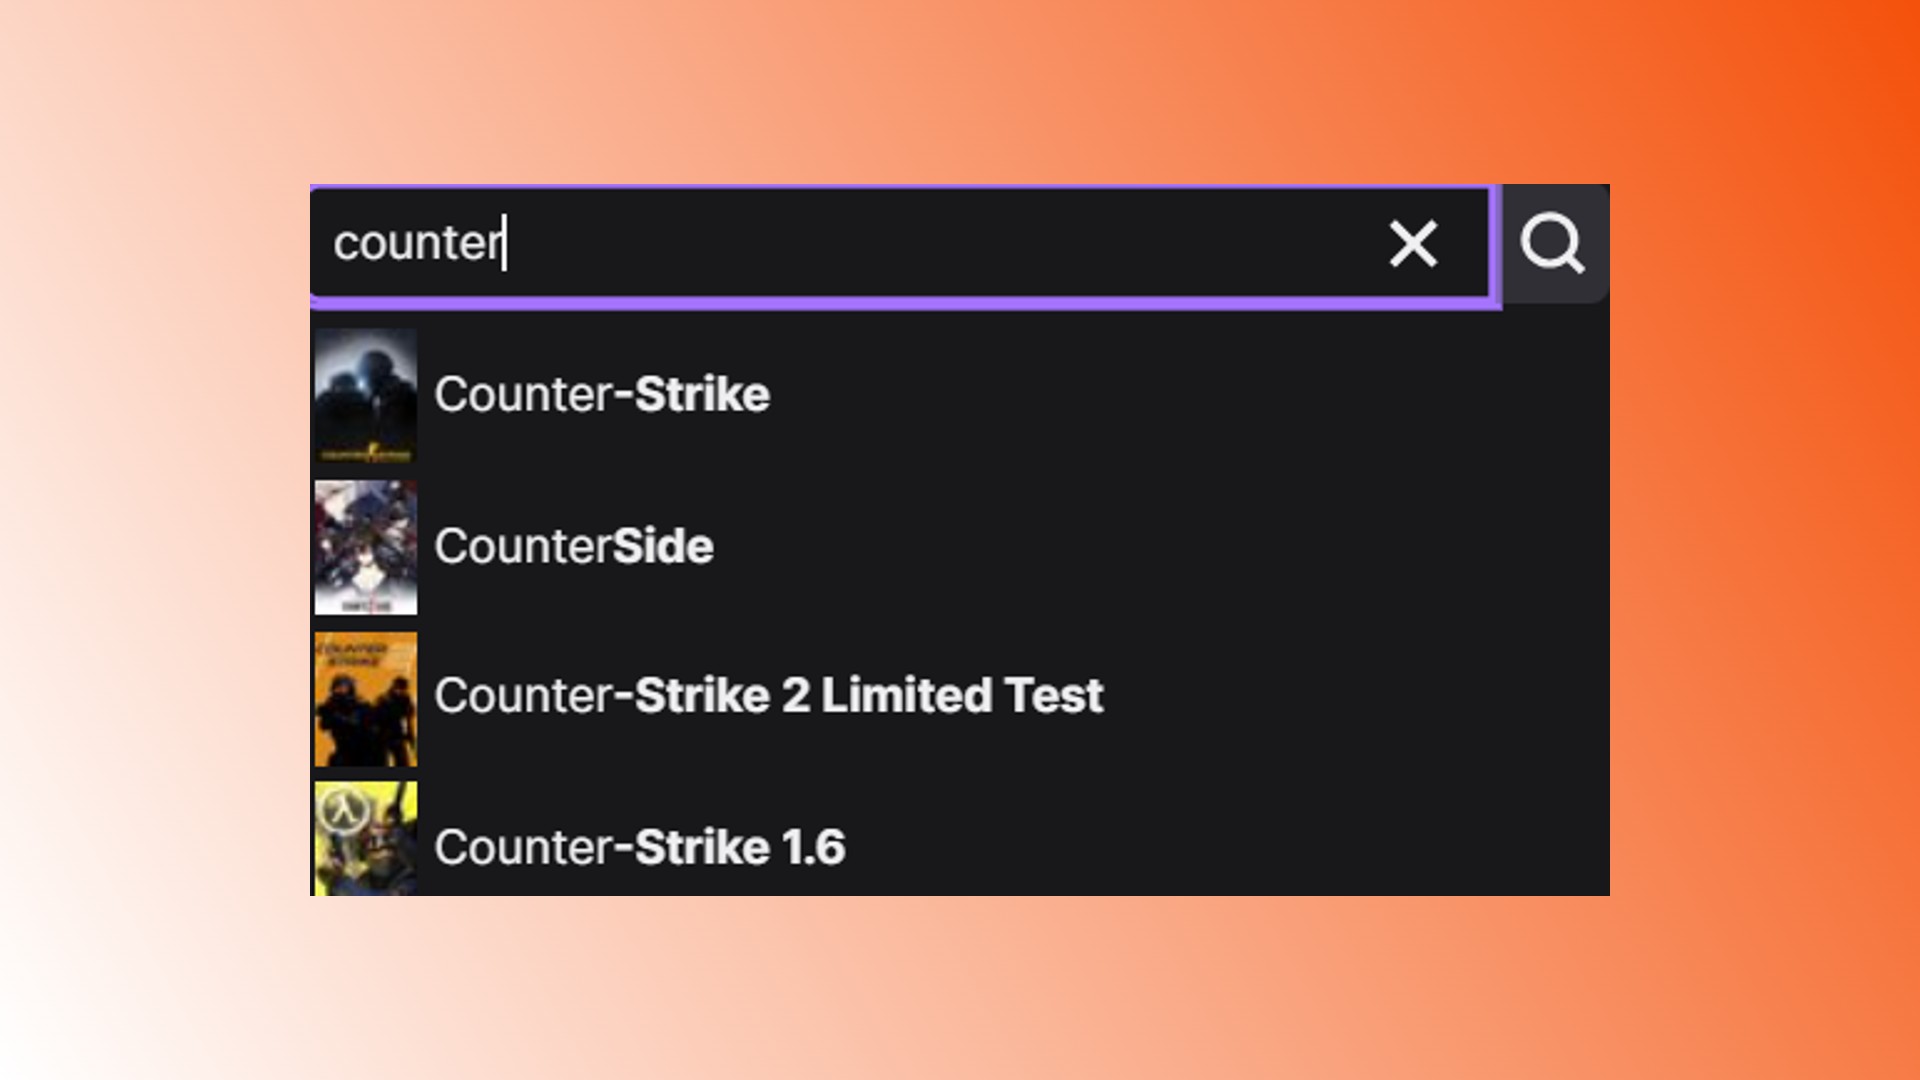 CSGO Twitch removed: An image from Twitch showing Counter-Strike games available to watch